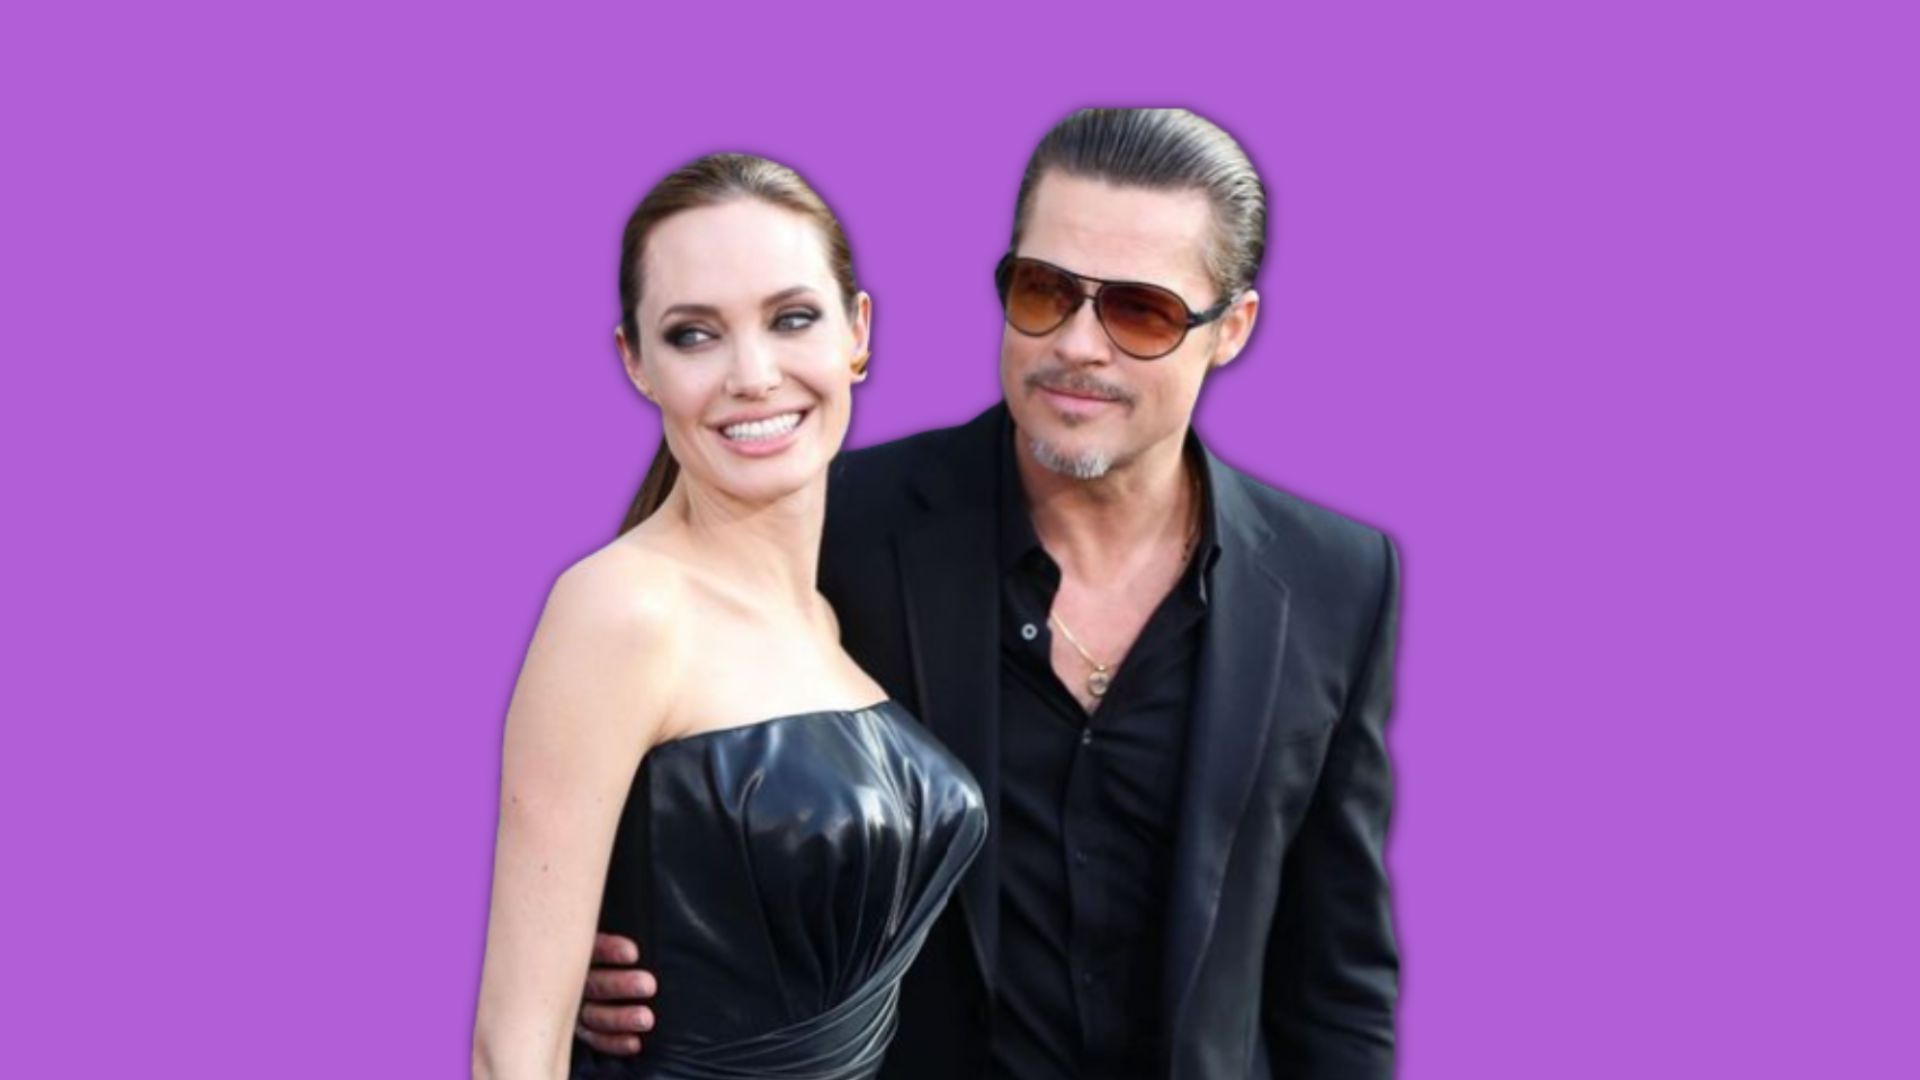 Angelina Jolie Reveals Details Of Domestic Abuse By Brad Pitt In Countersuit. This Is Proof That Abuse Can Happen To Anyone!